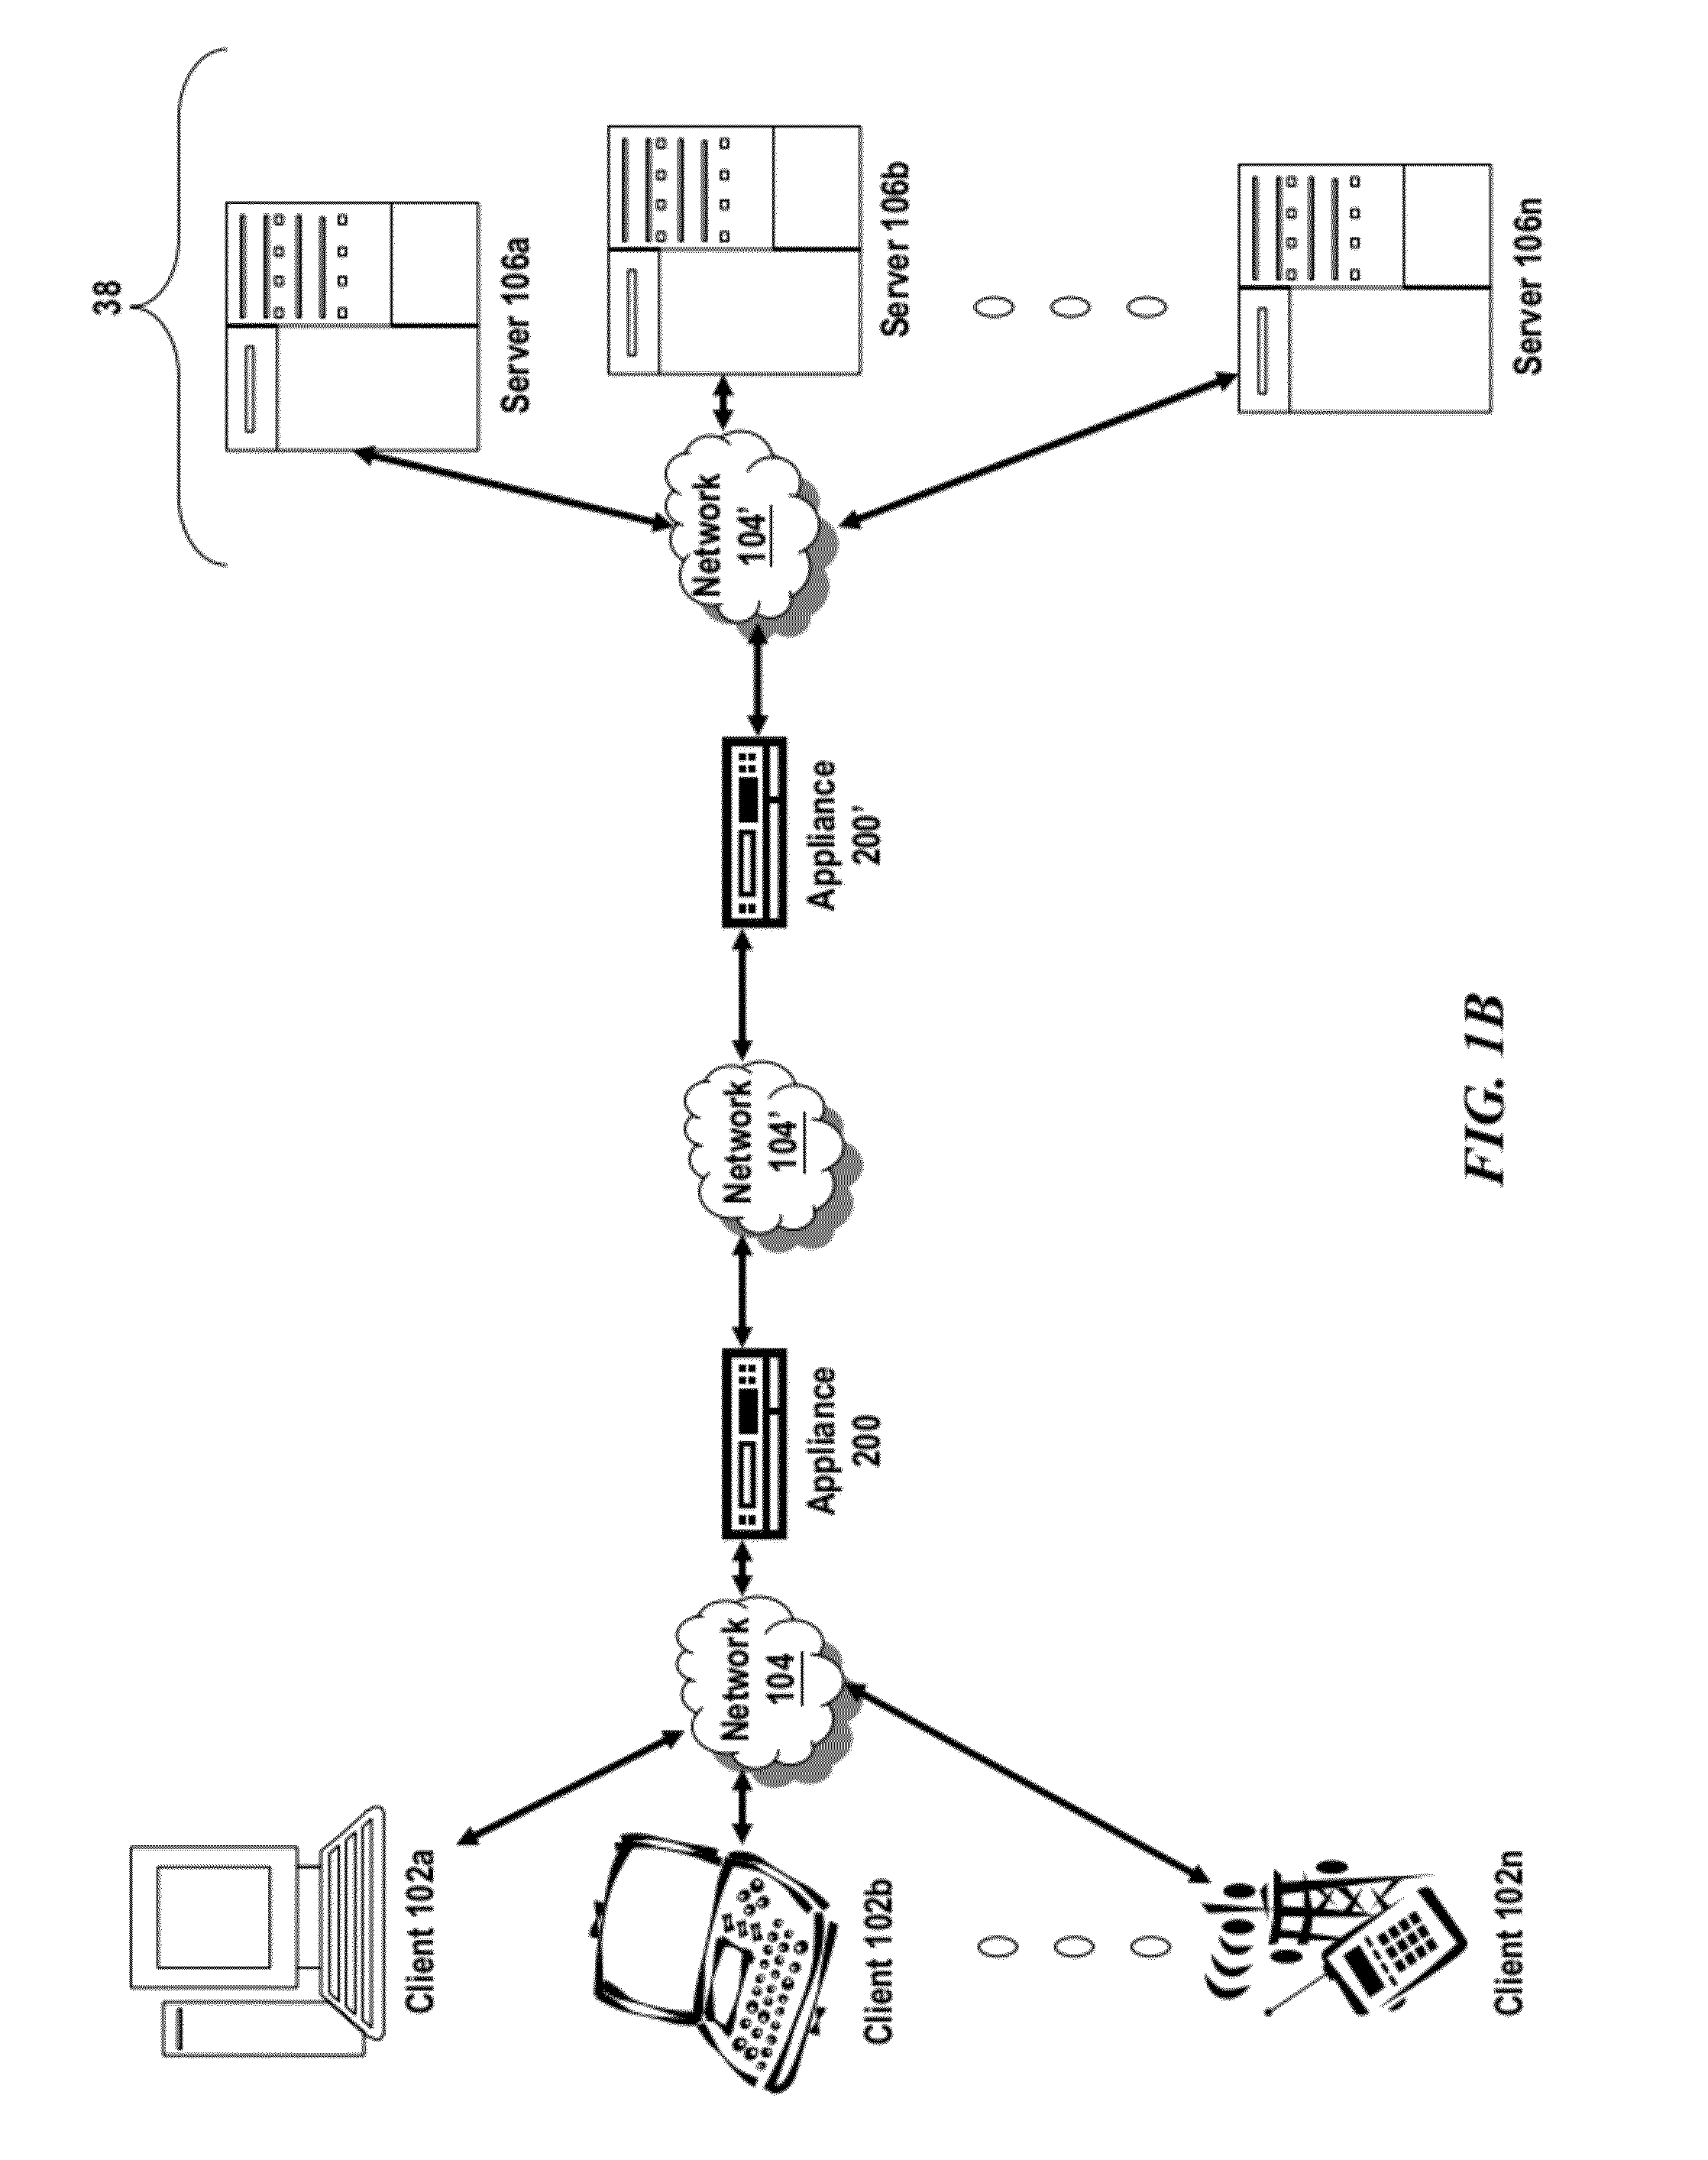 Systems and Methods for Implementing Connection Mirroring in a Multi-Core System